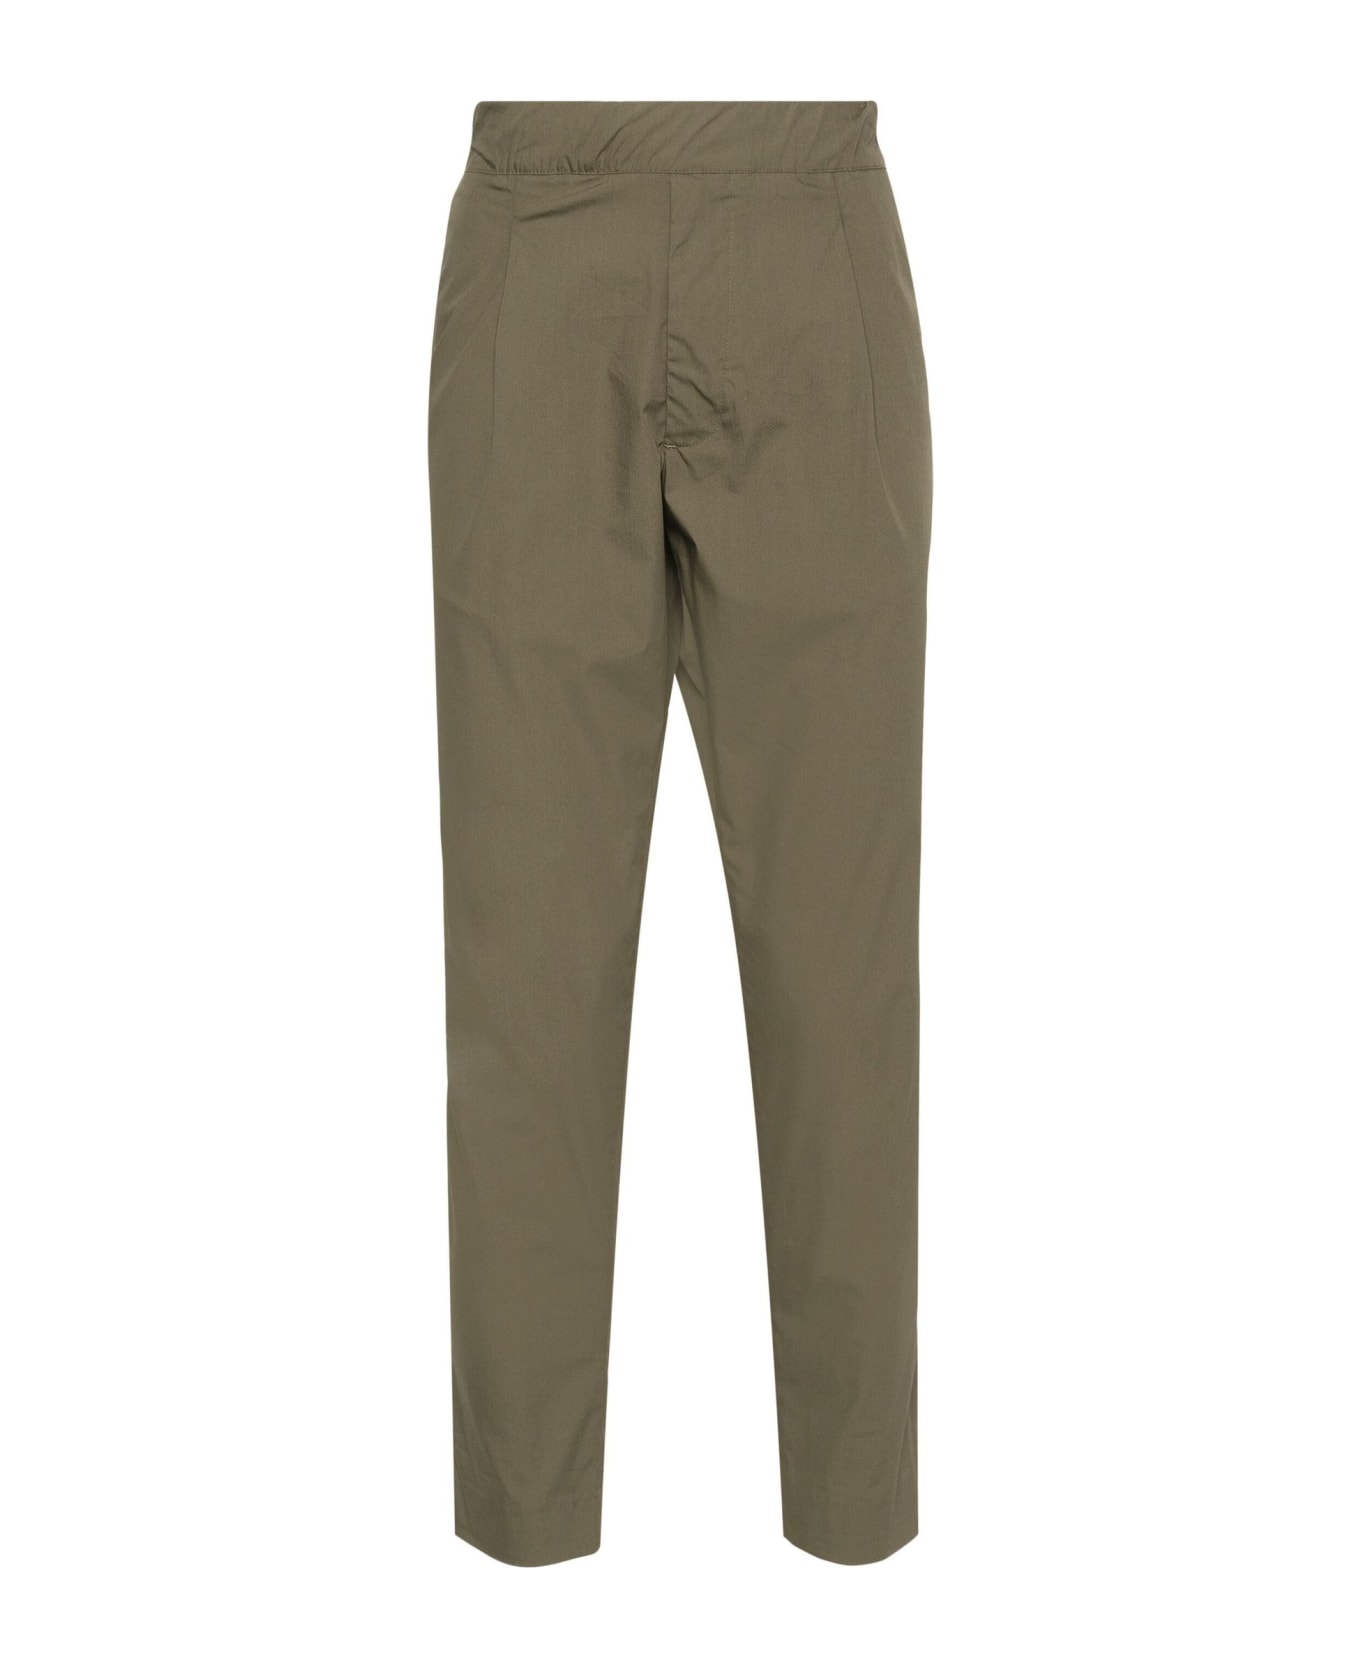 Low Brand Trousers Green - Green